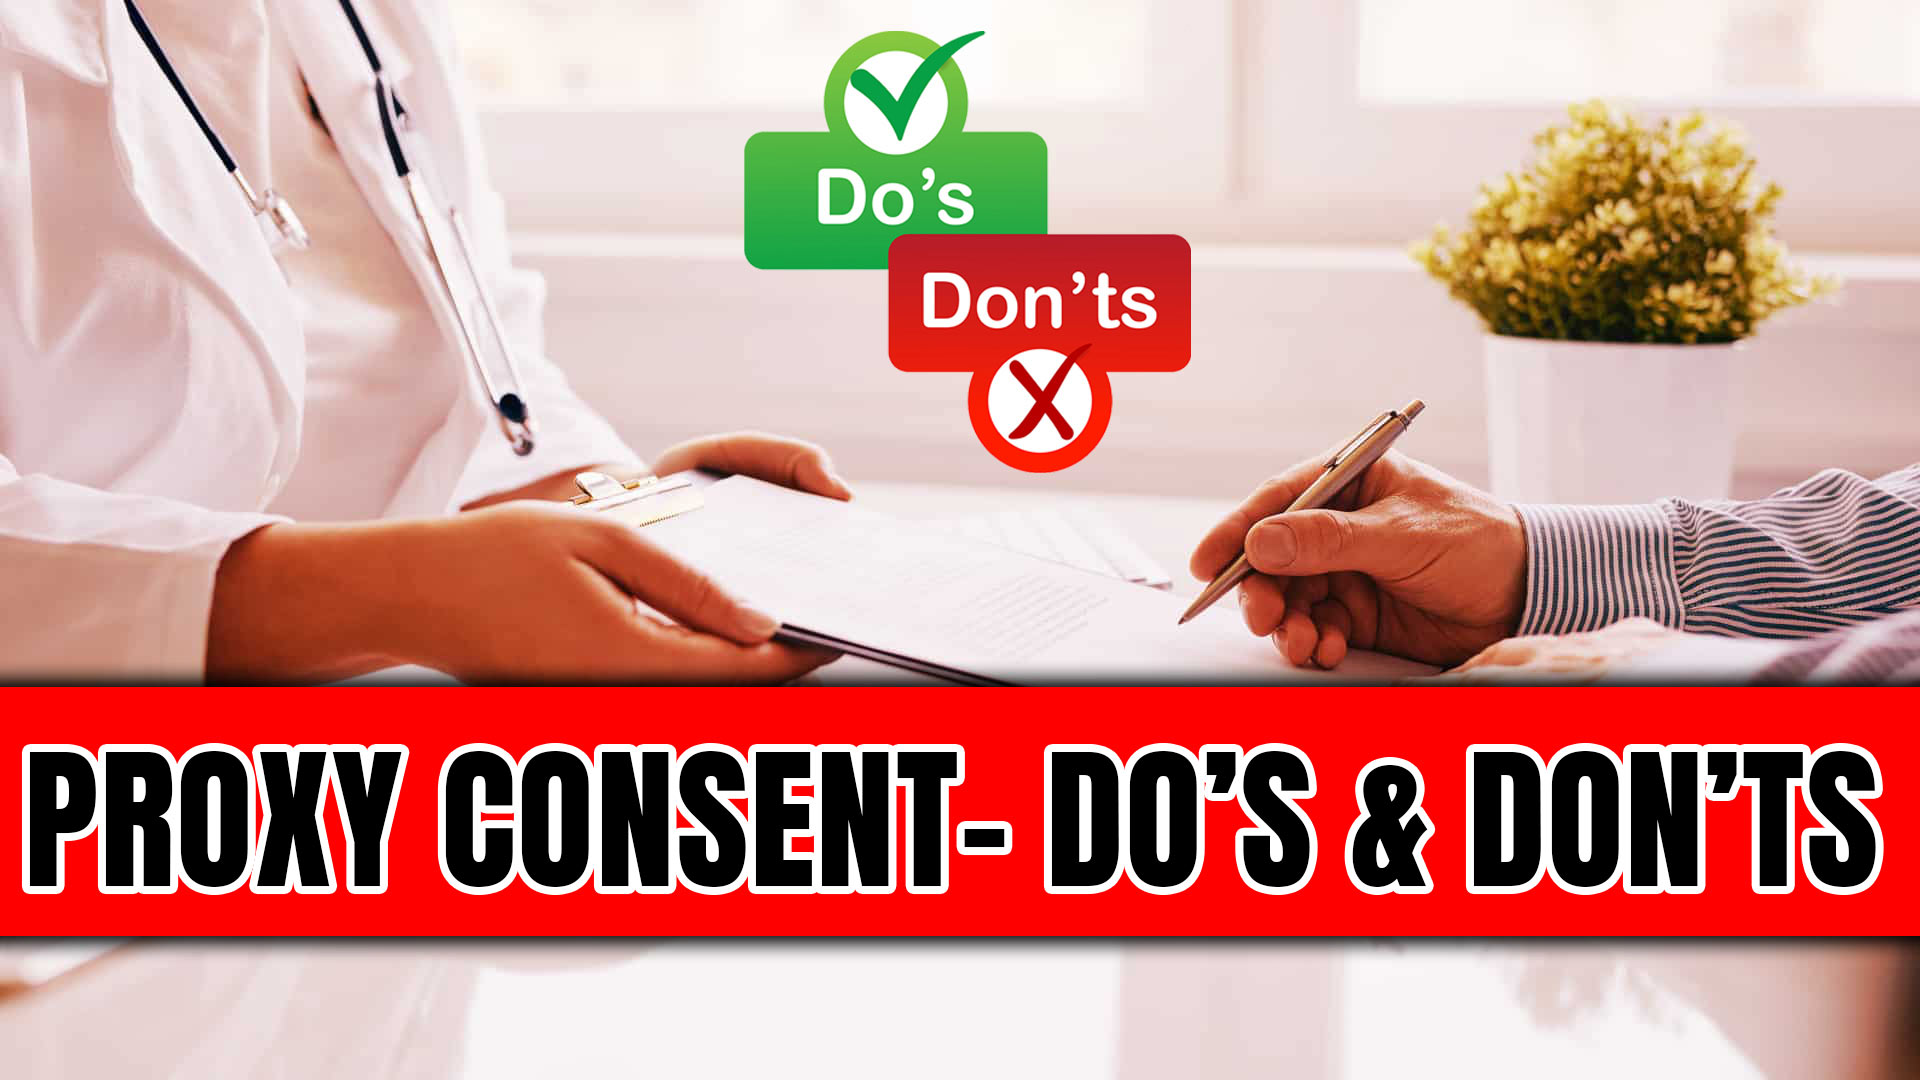 Proxy Consent - Do's and Don'ts